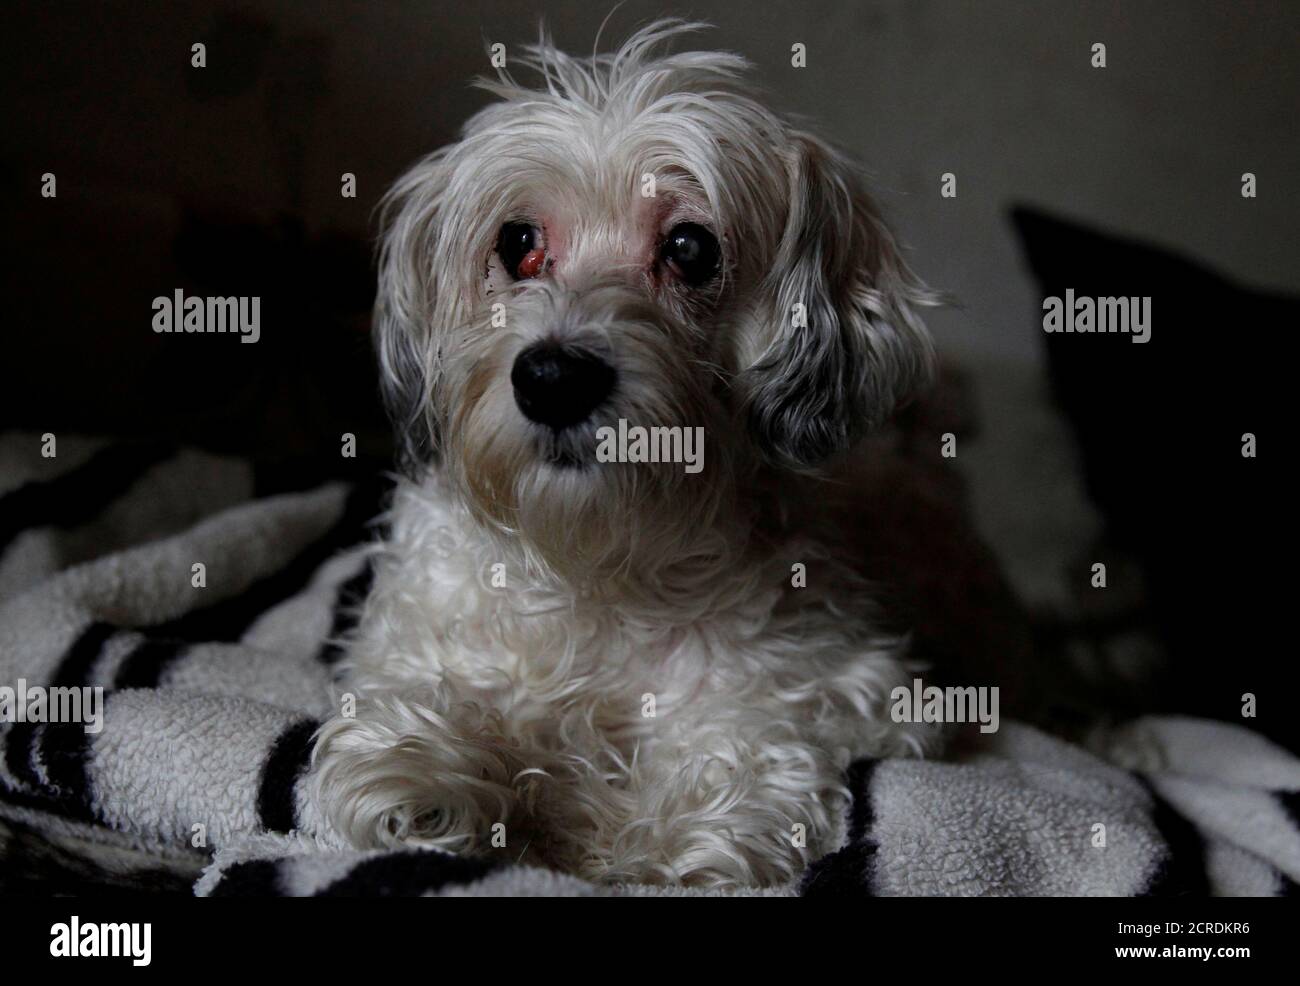 A 9-year-old Havanese dog called Zsazsa is seen after being rescued by animal protection services after being found lying alongside the body of her owner who had died weeks earlier, in Budapest, Hungary January 5, 2018. REUTERS/Bernadett Szabo     TPX IMAGES OF THE DAY Stock Photo